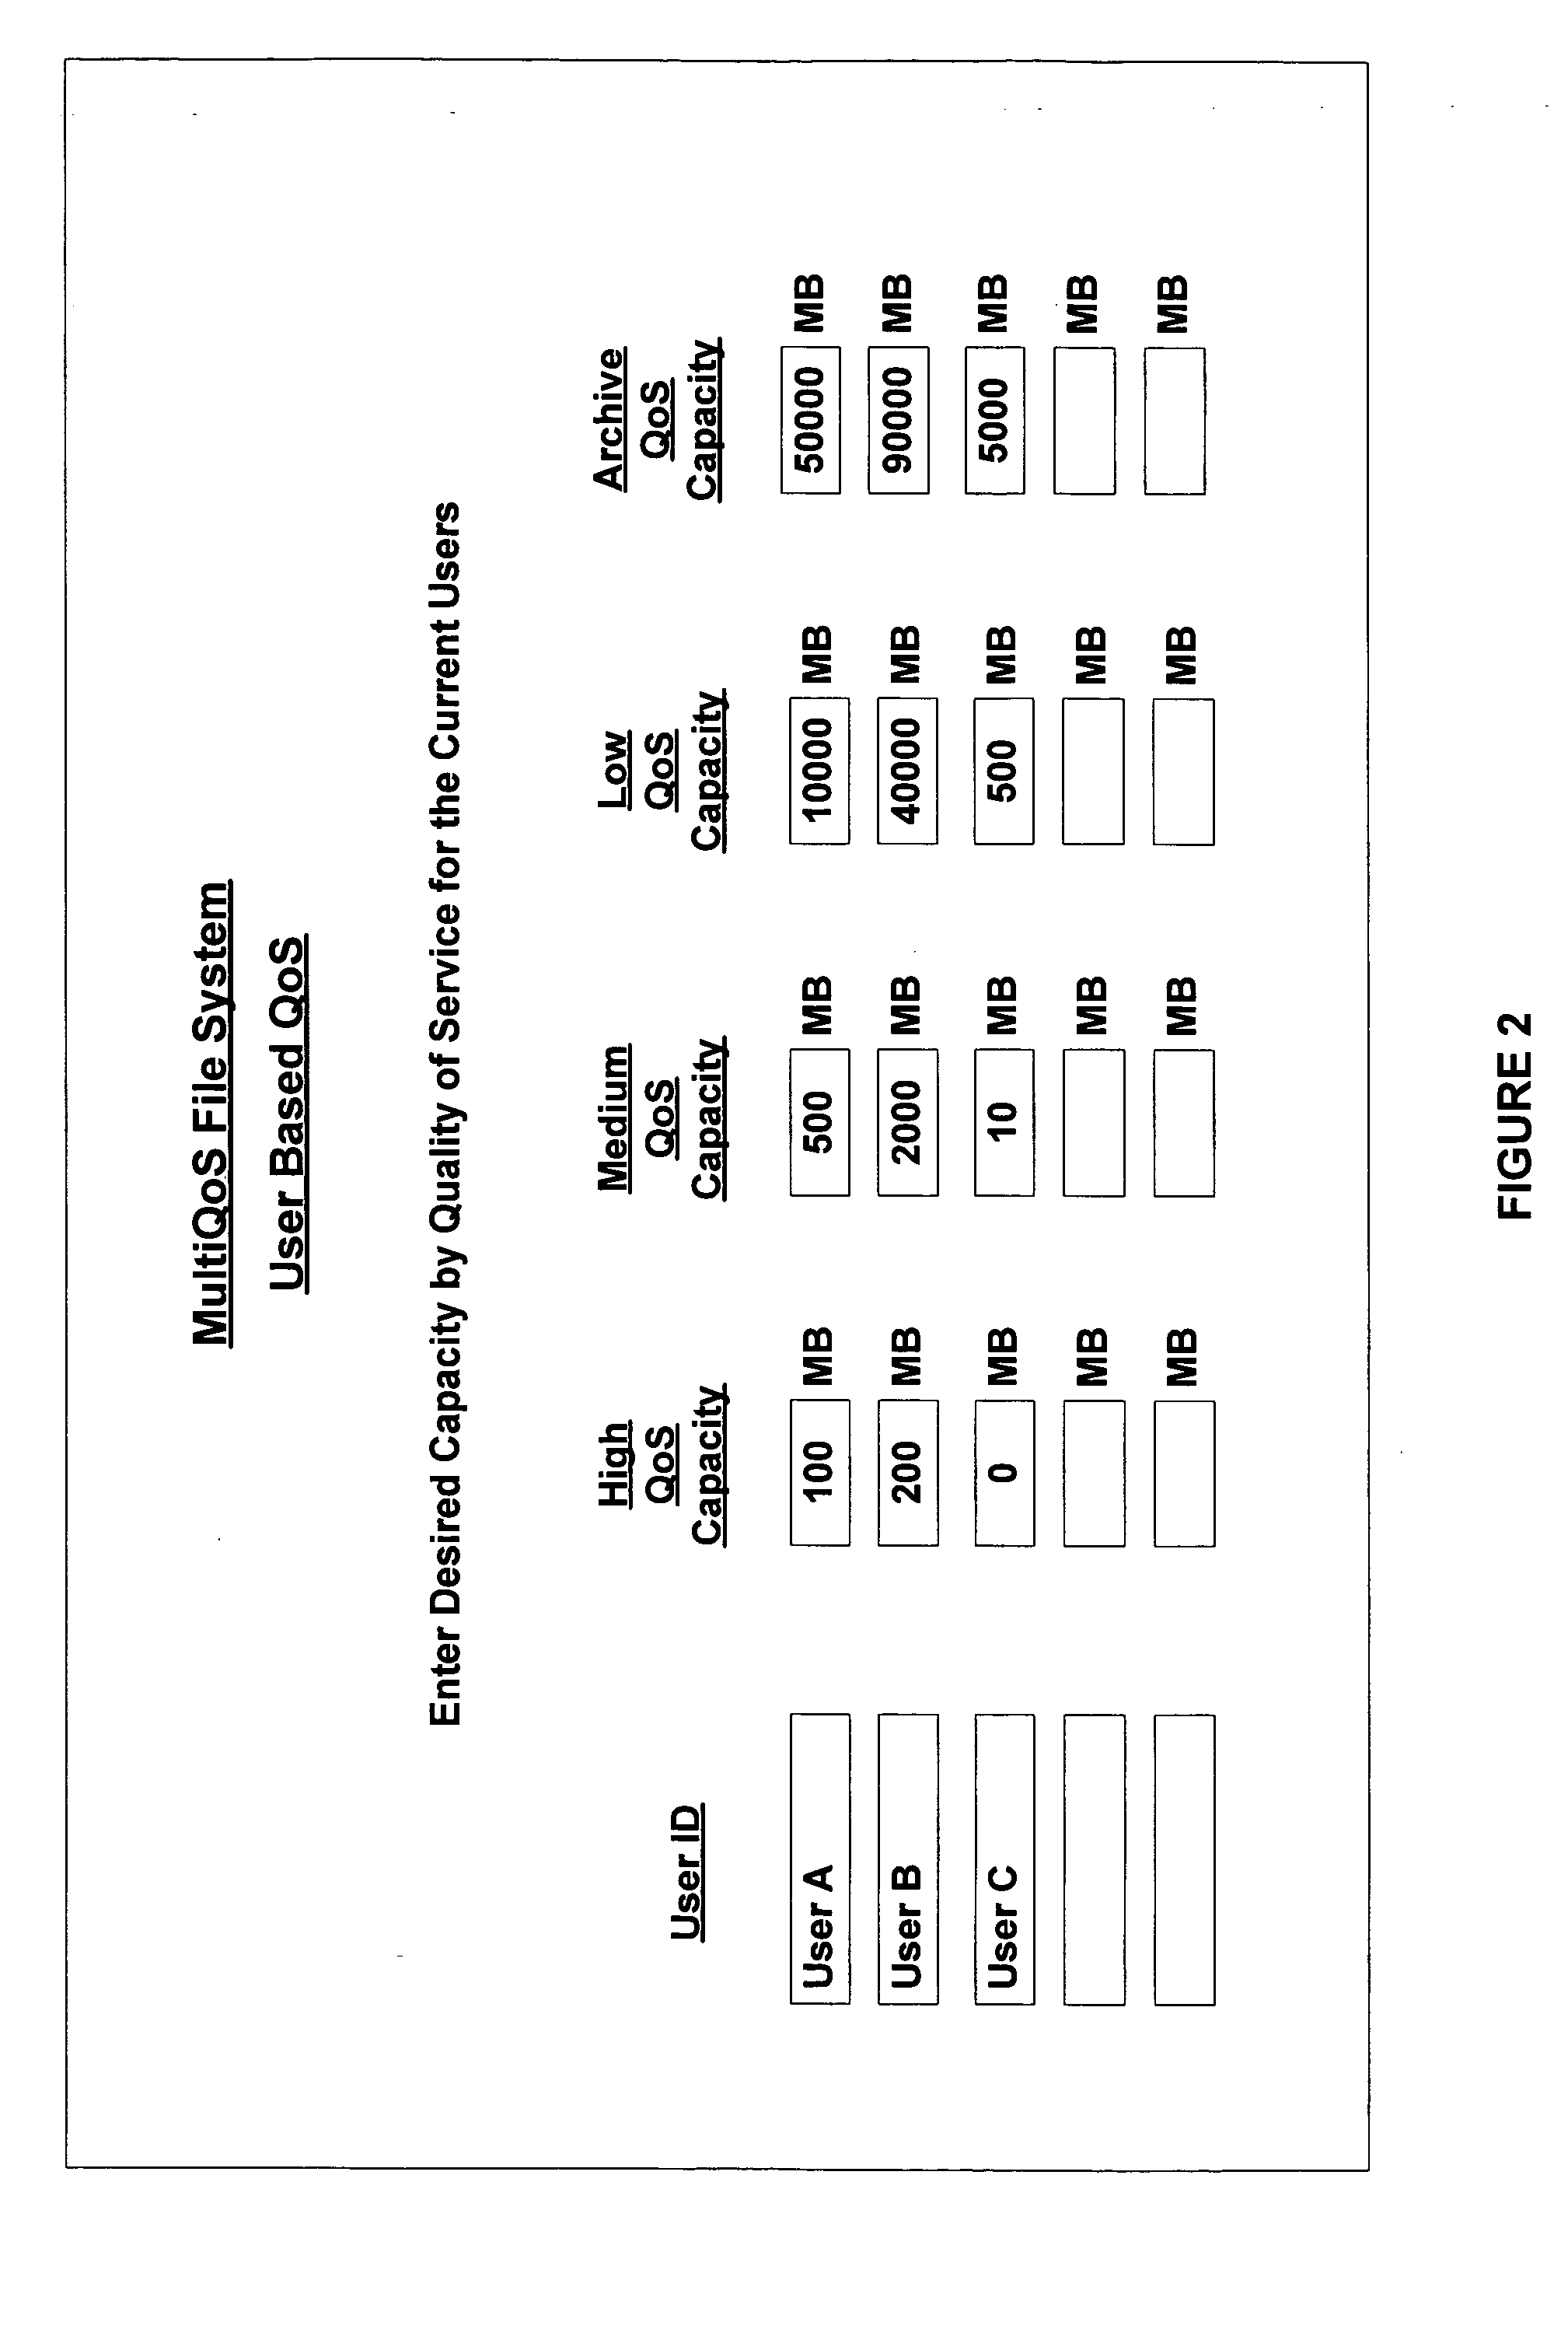 Multiple quality of service file system